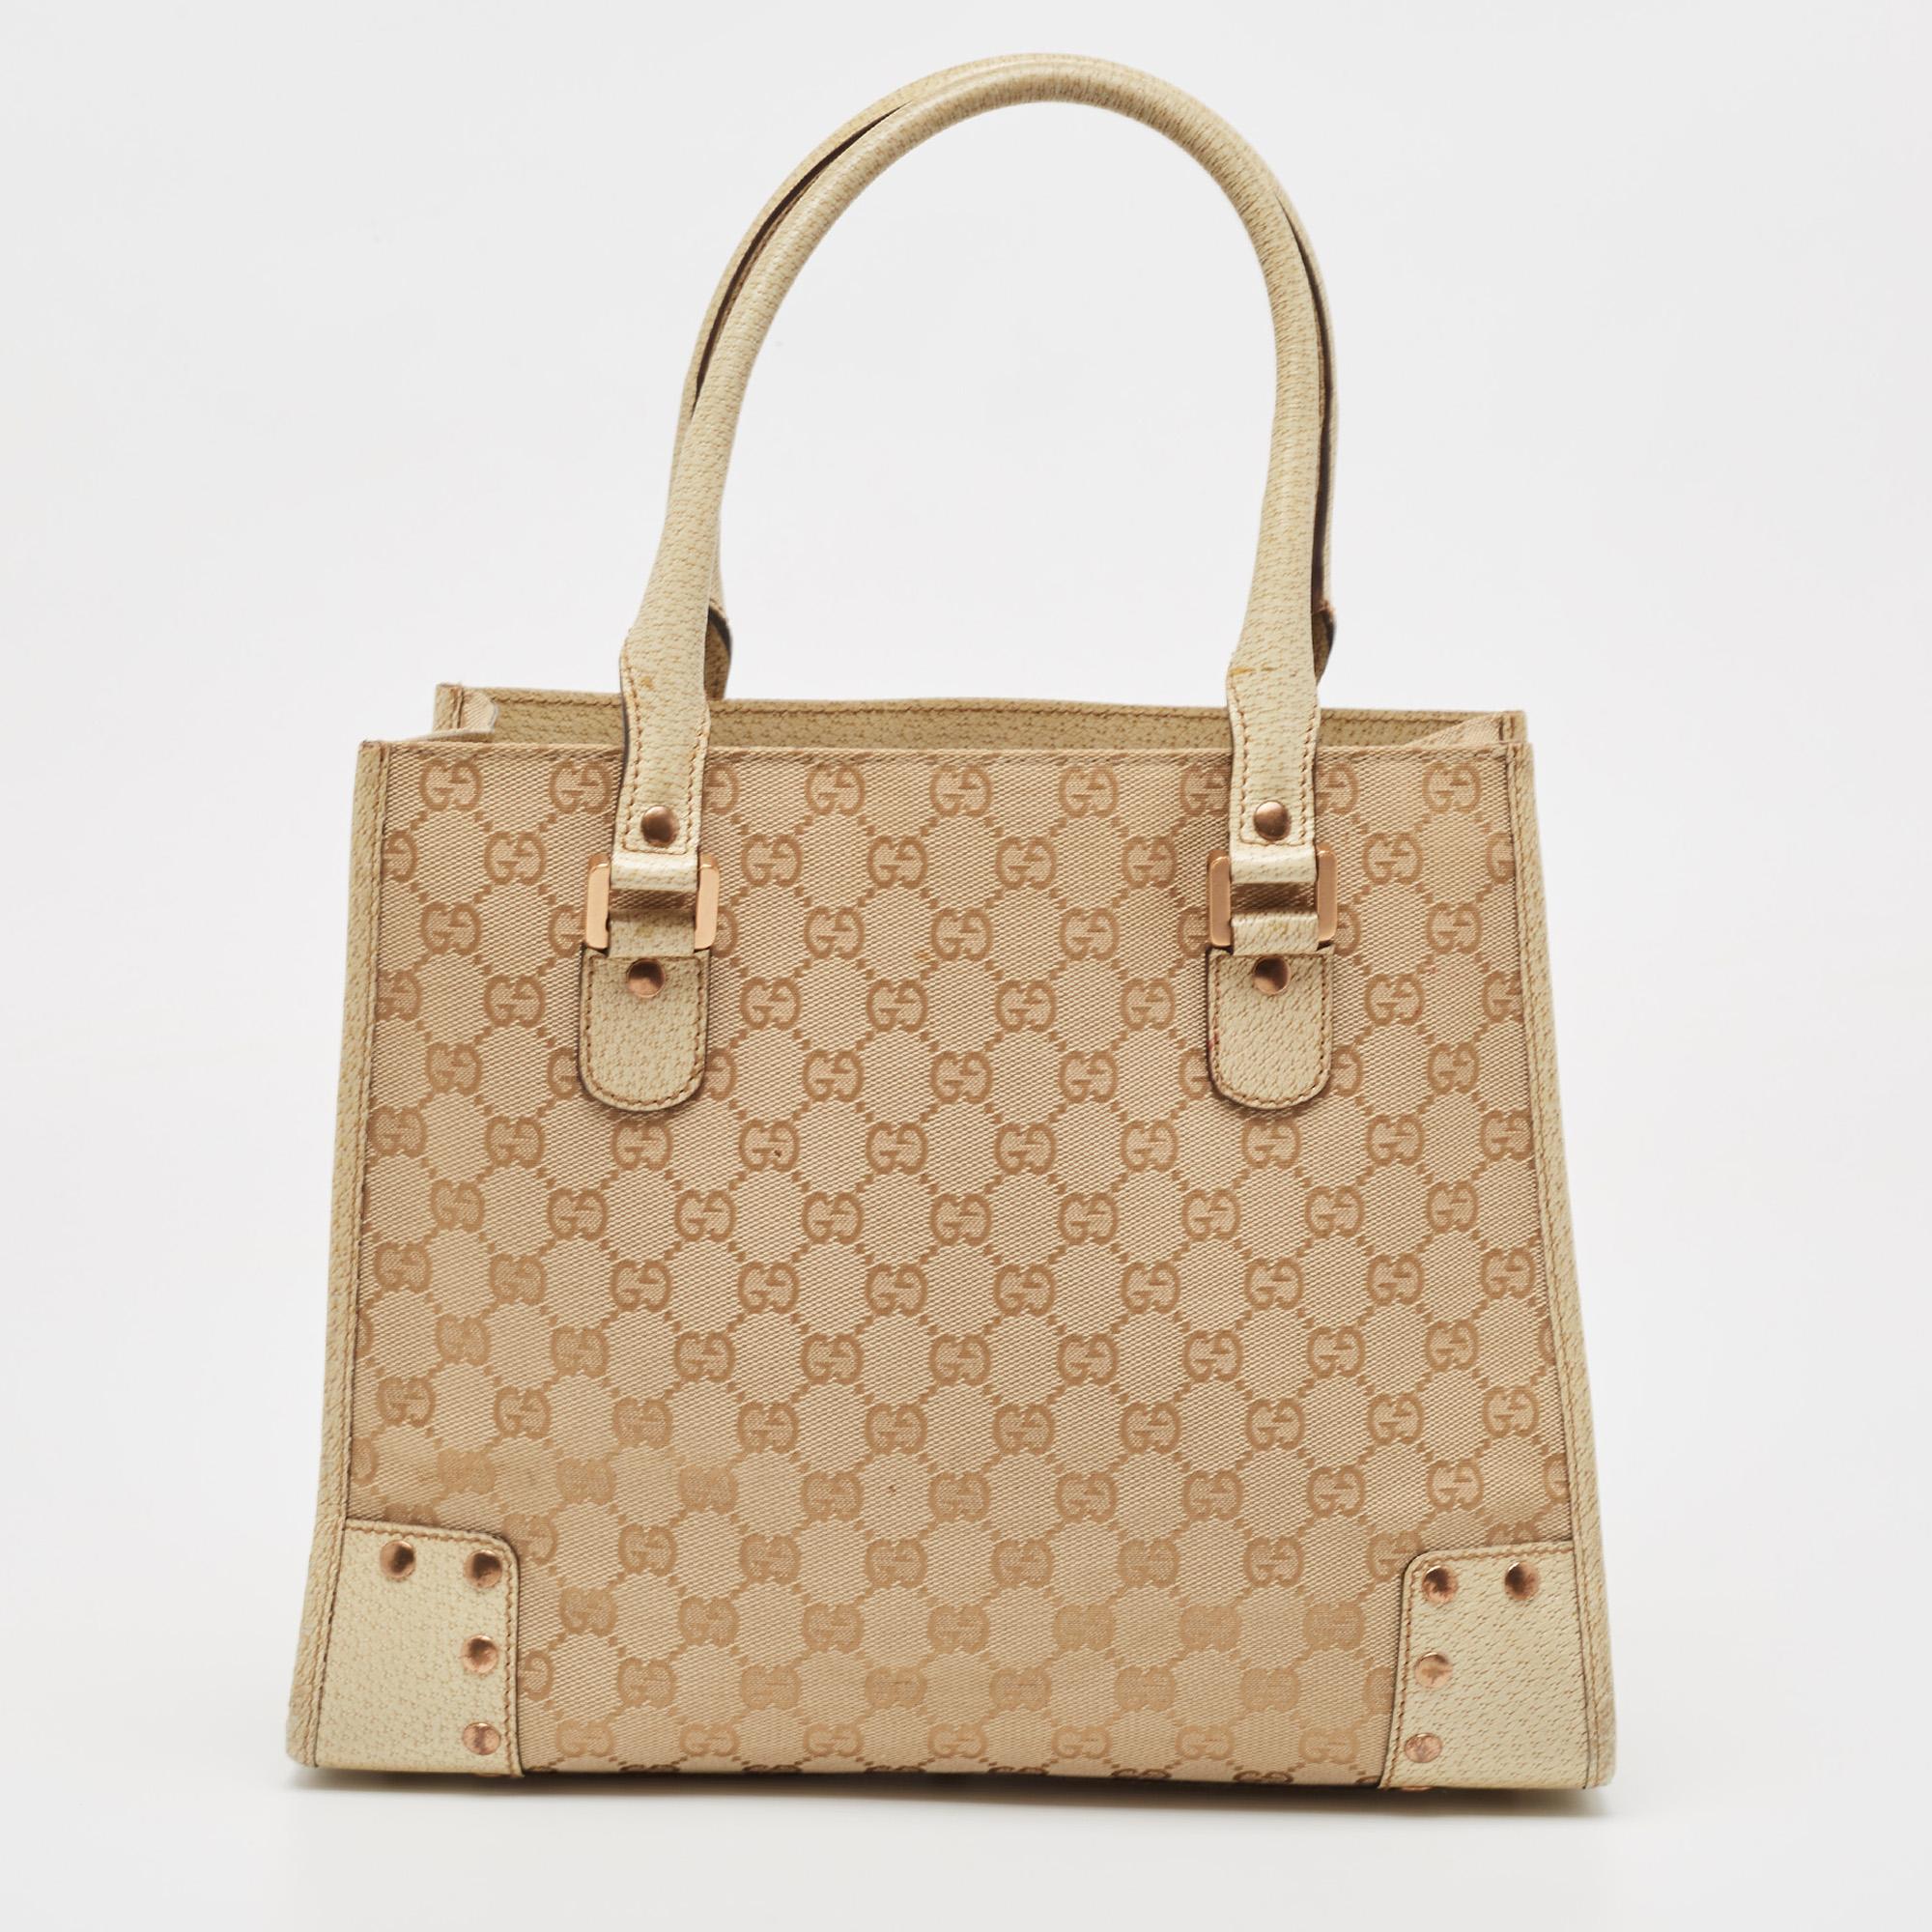 Indulge in luxury with this Gucci GG canvas bag. Meticulously crafted from premium materials, it combines exquisite design, impeccable craftsmanship, and timeless elegance. Elevate your style with this fashion accessory.

Includes: Original Dustbag

